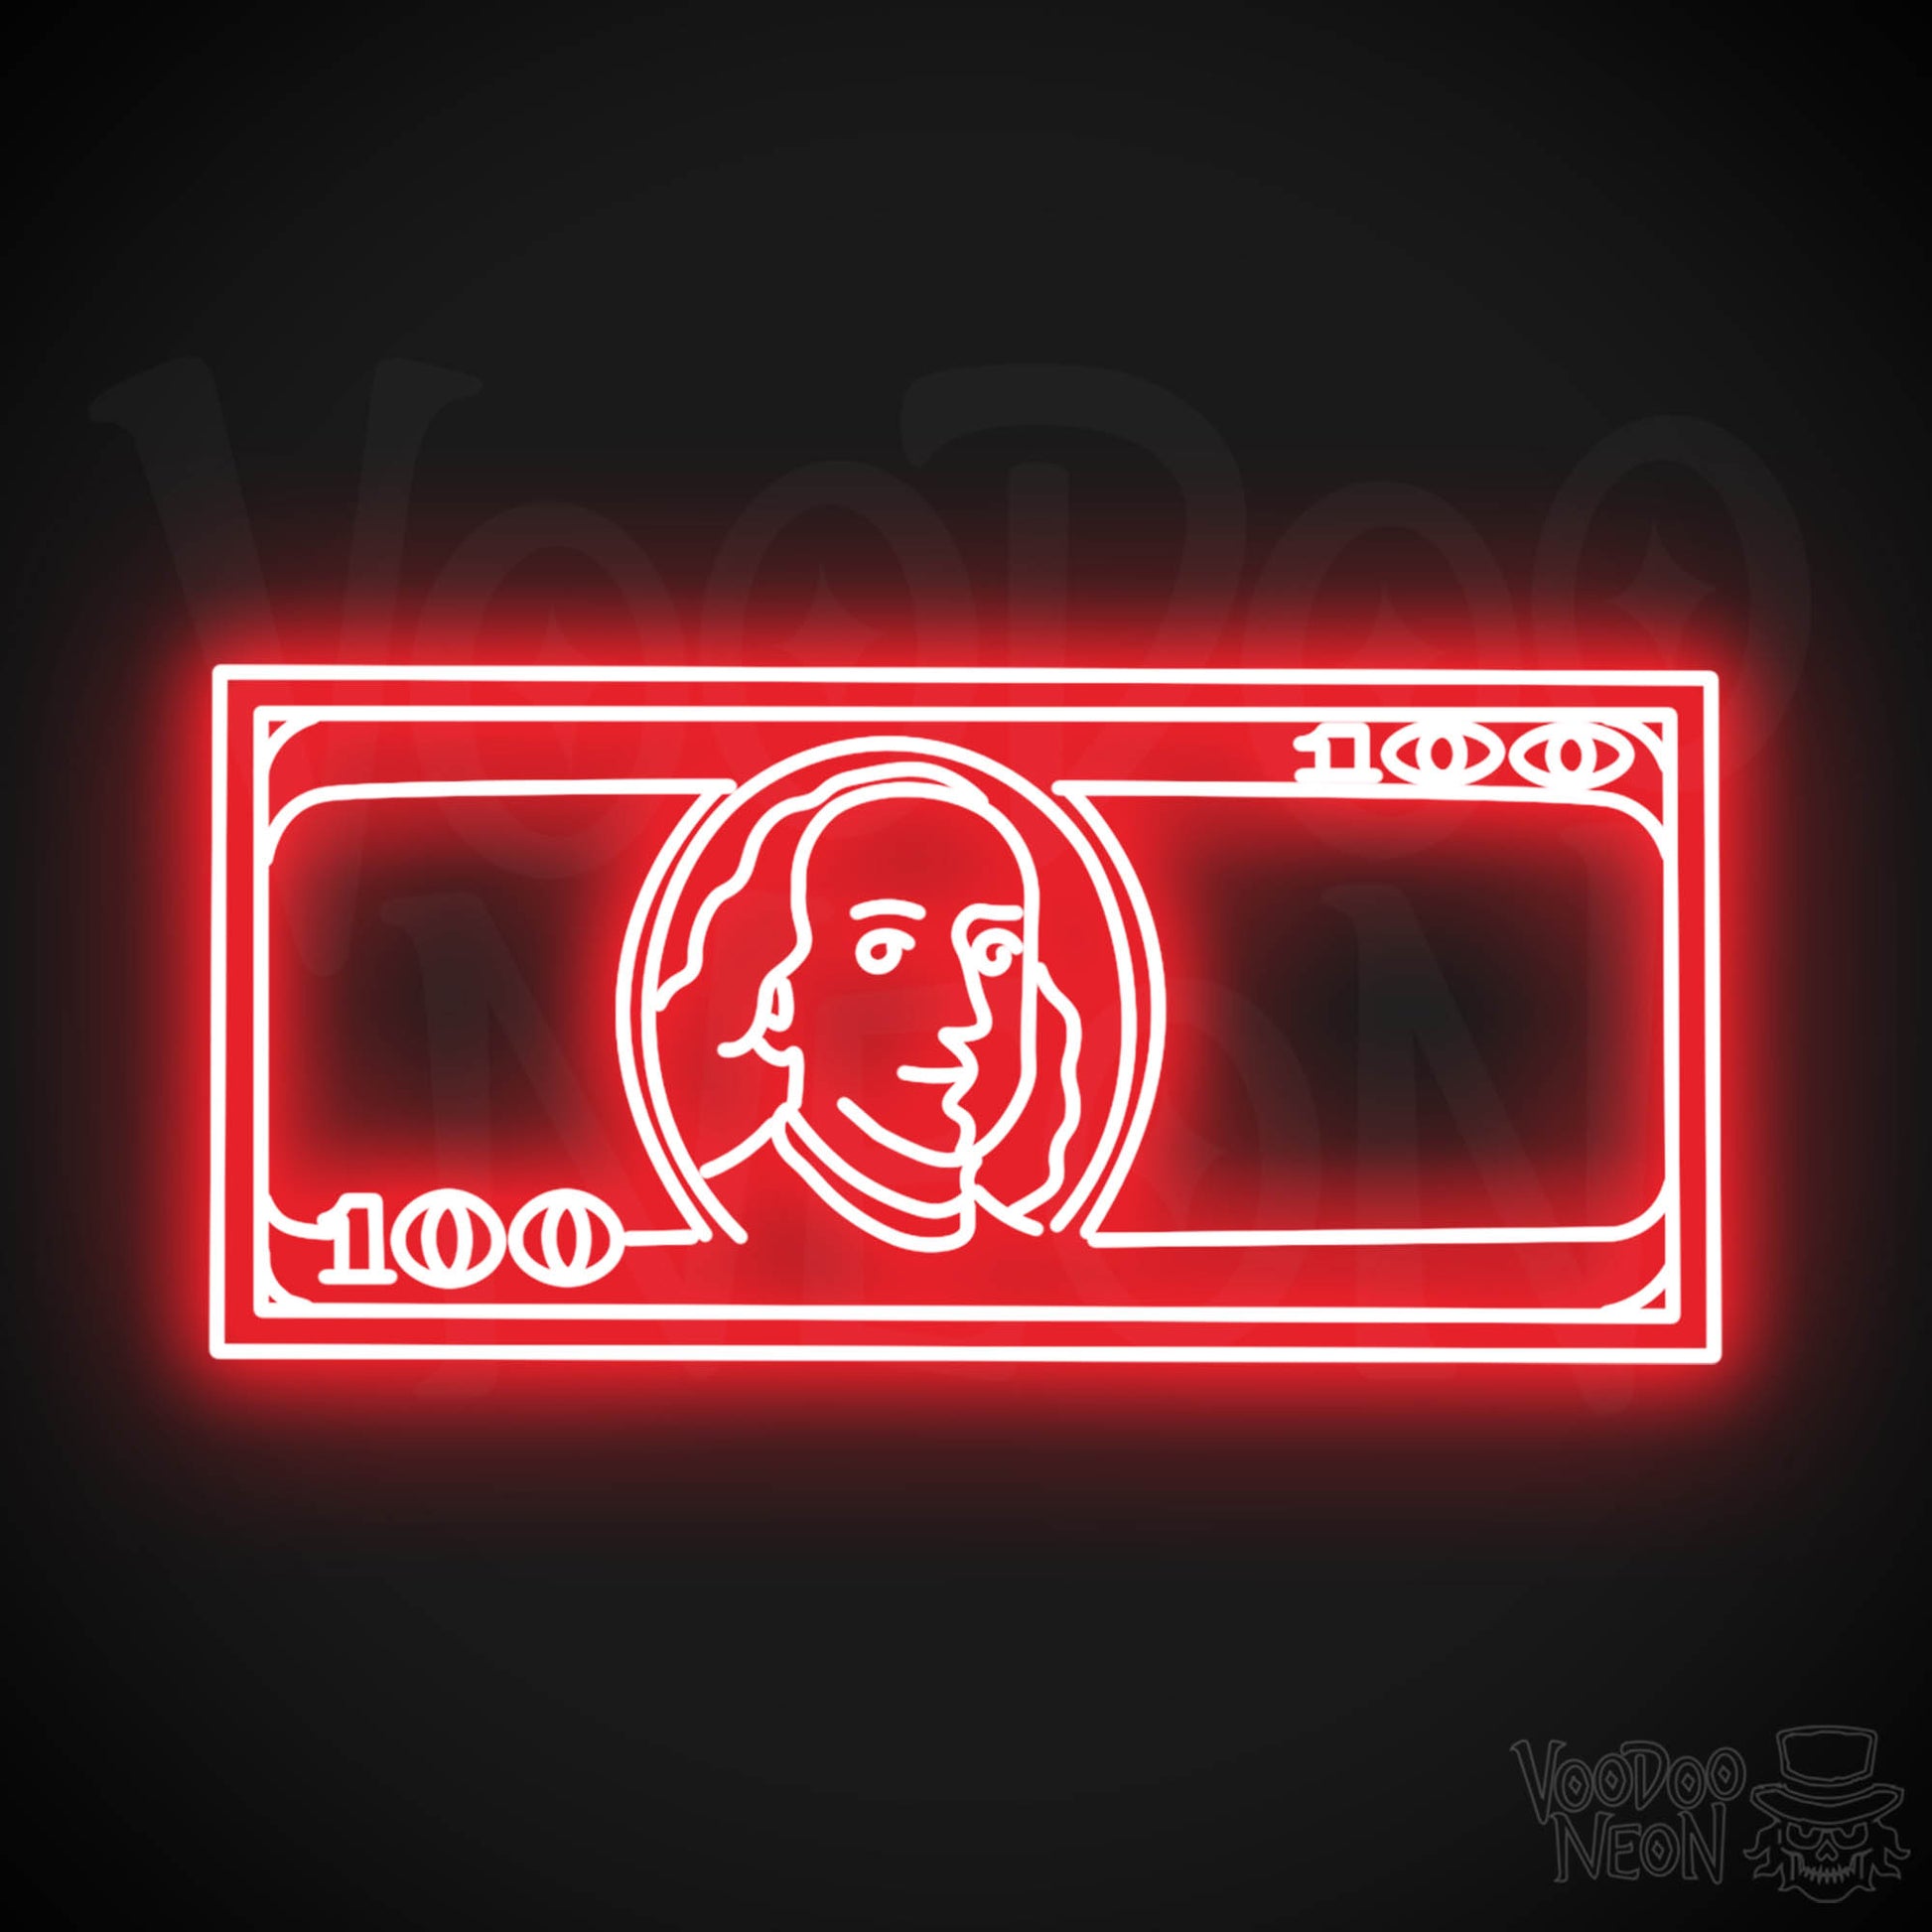 US $100 Bill Neon Sign - Neon $100 Sign - Color Red